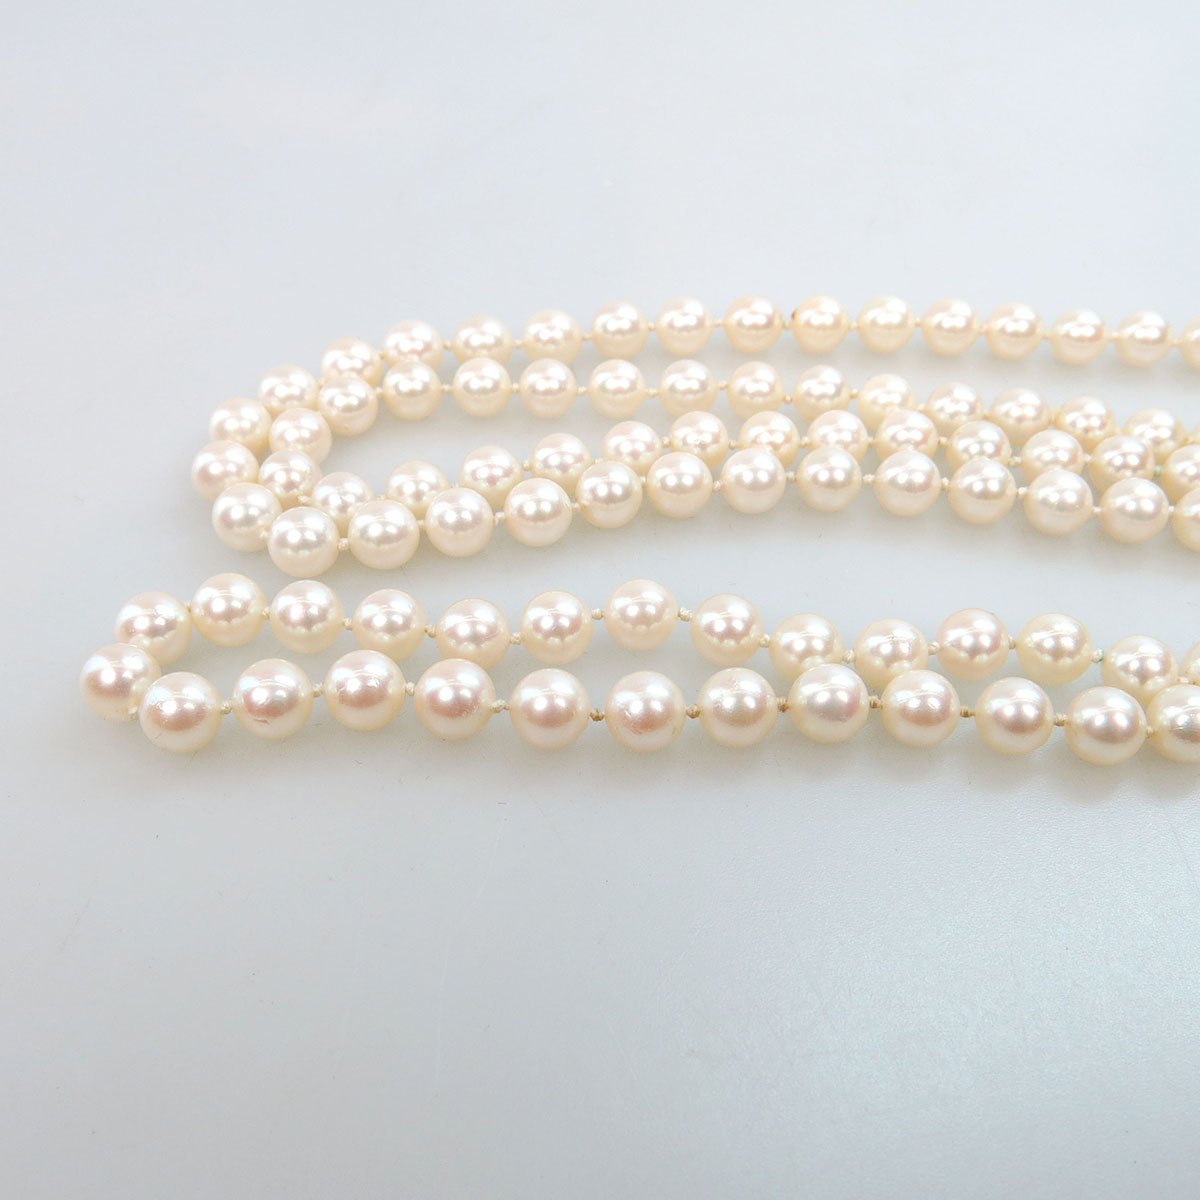 Single Endless Strand Of Cultured Pearls